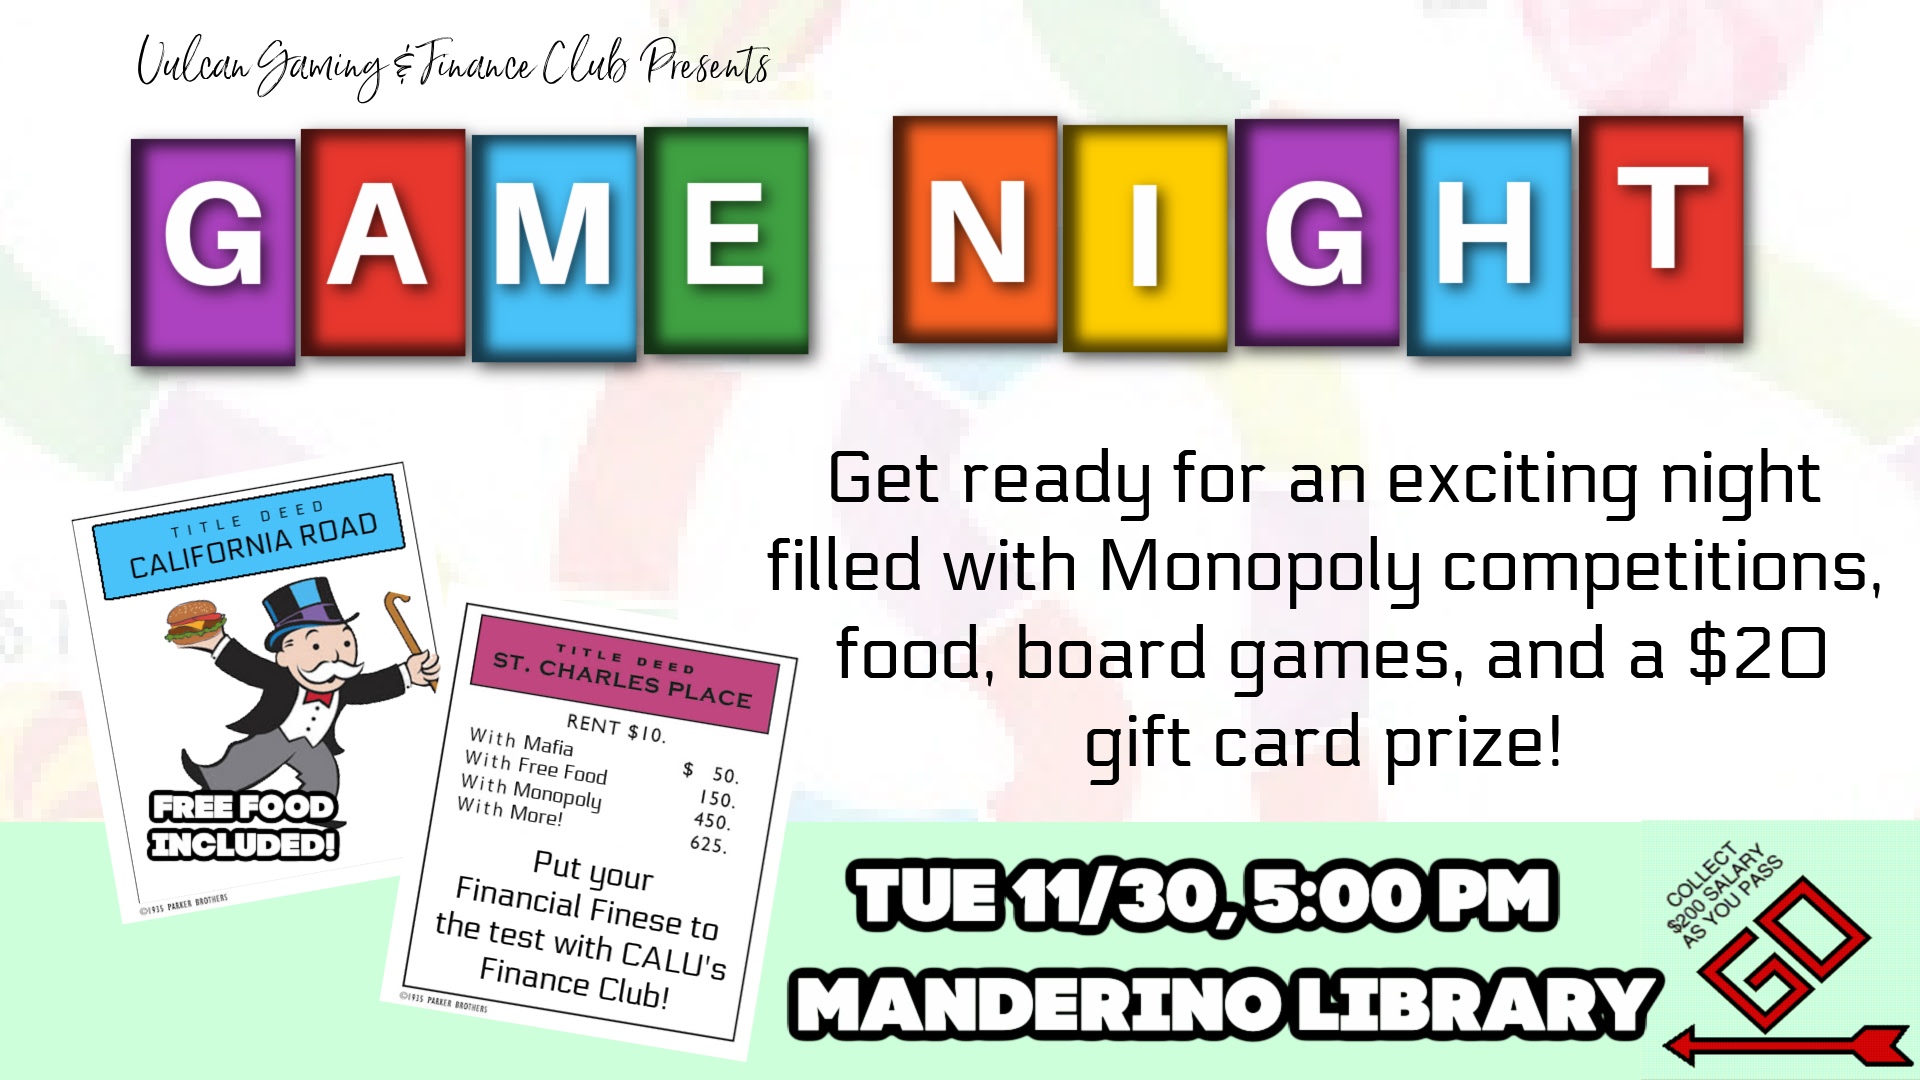 Game Night Ad - All information is in the email.